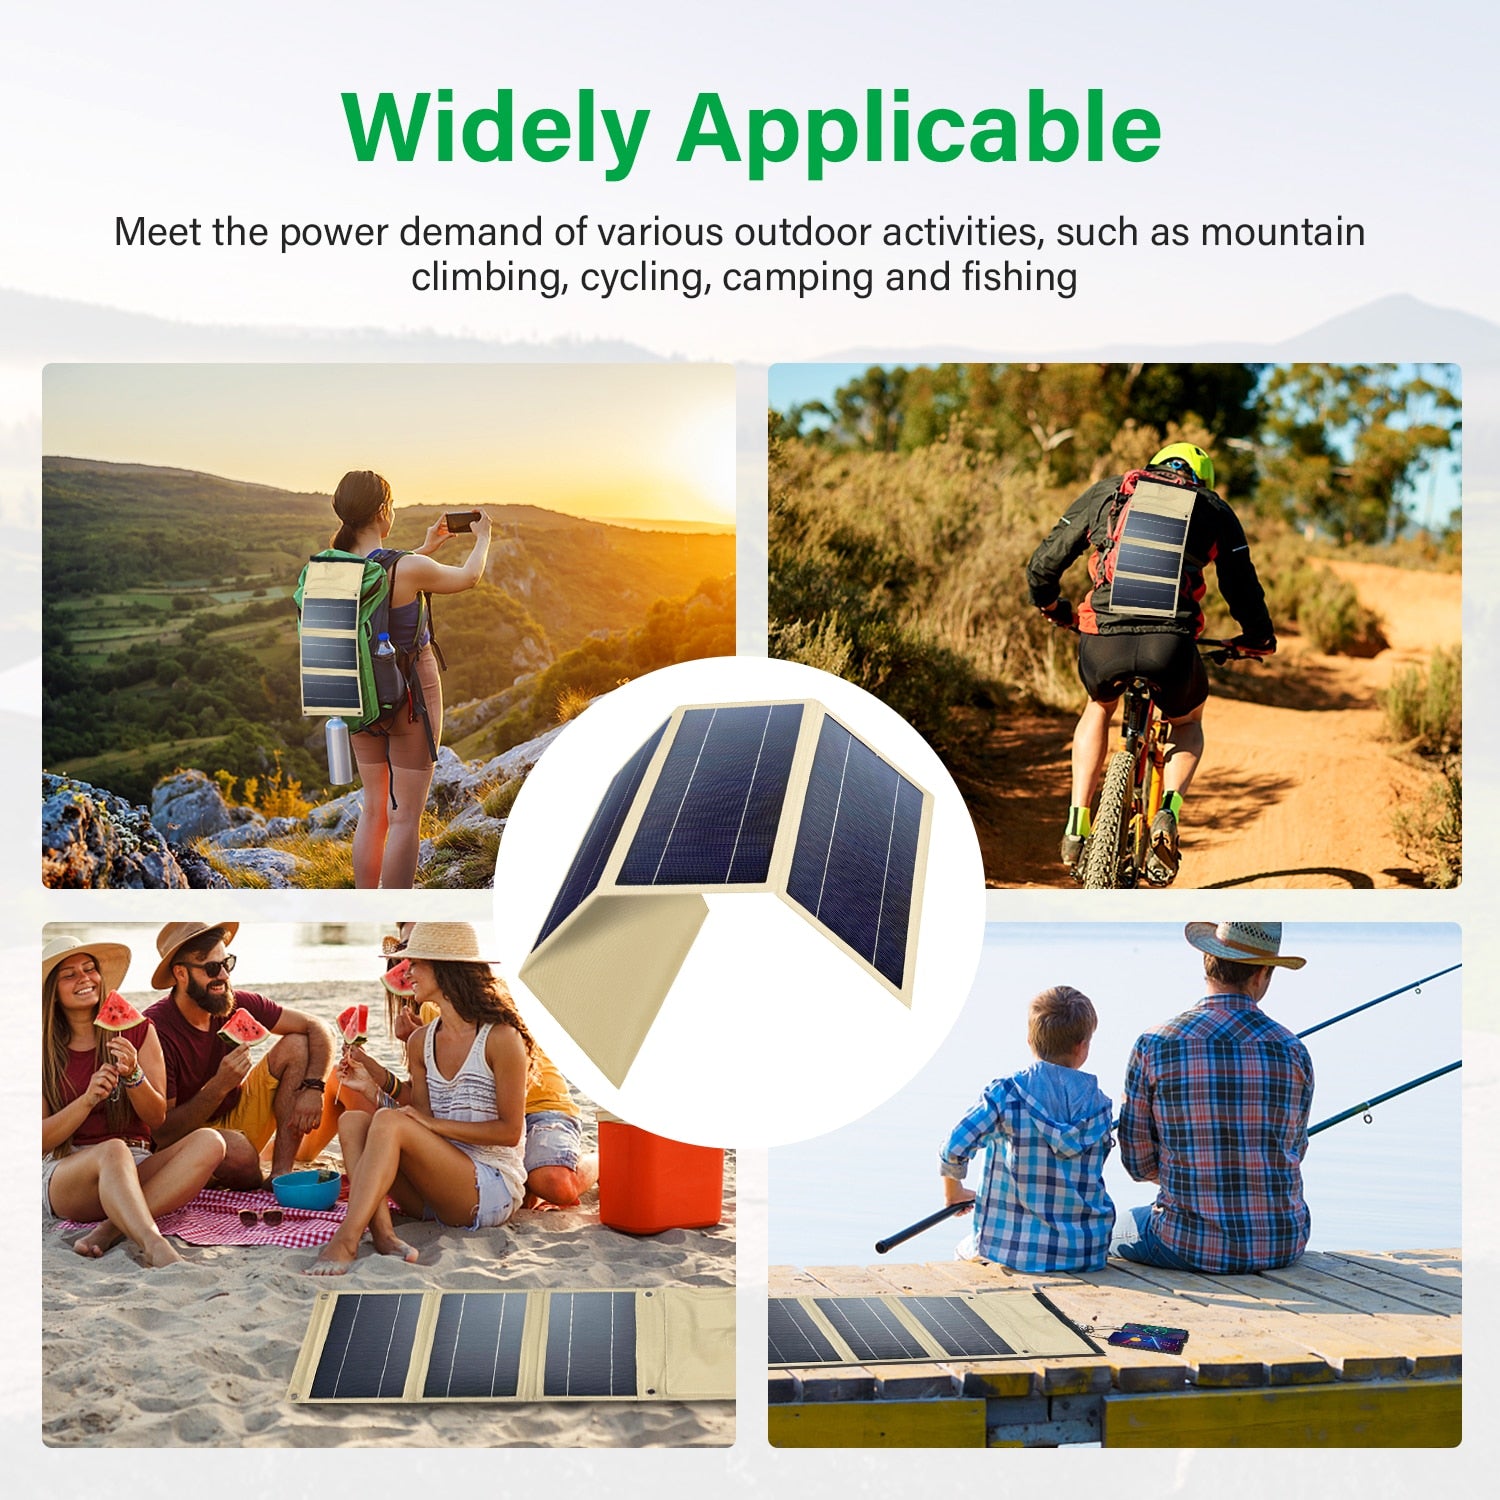 21W Solar Panel, widely Applicable Meet the power demand of various outdoor activities 